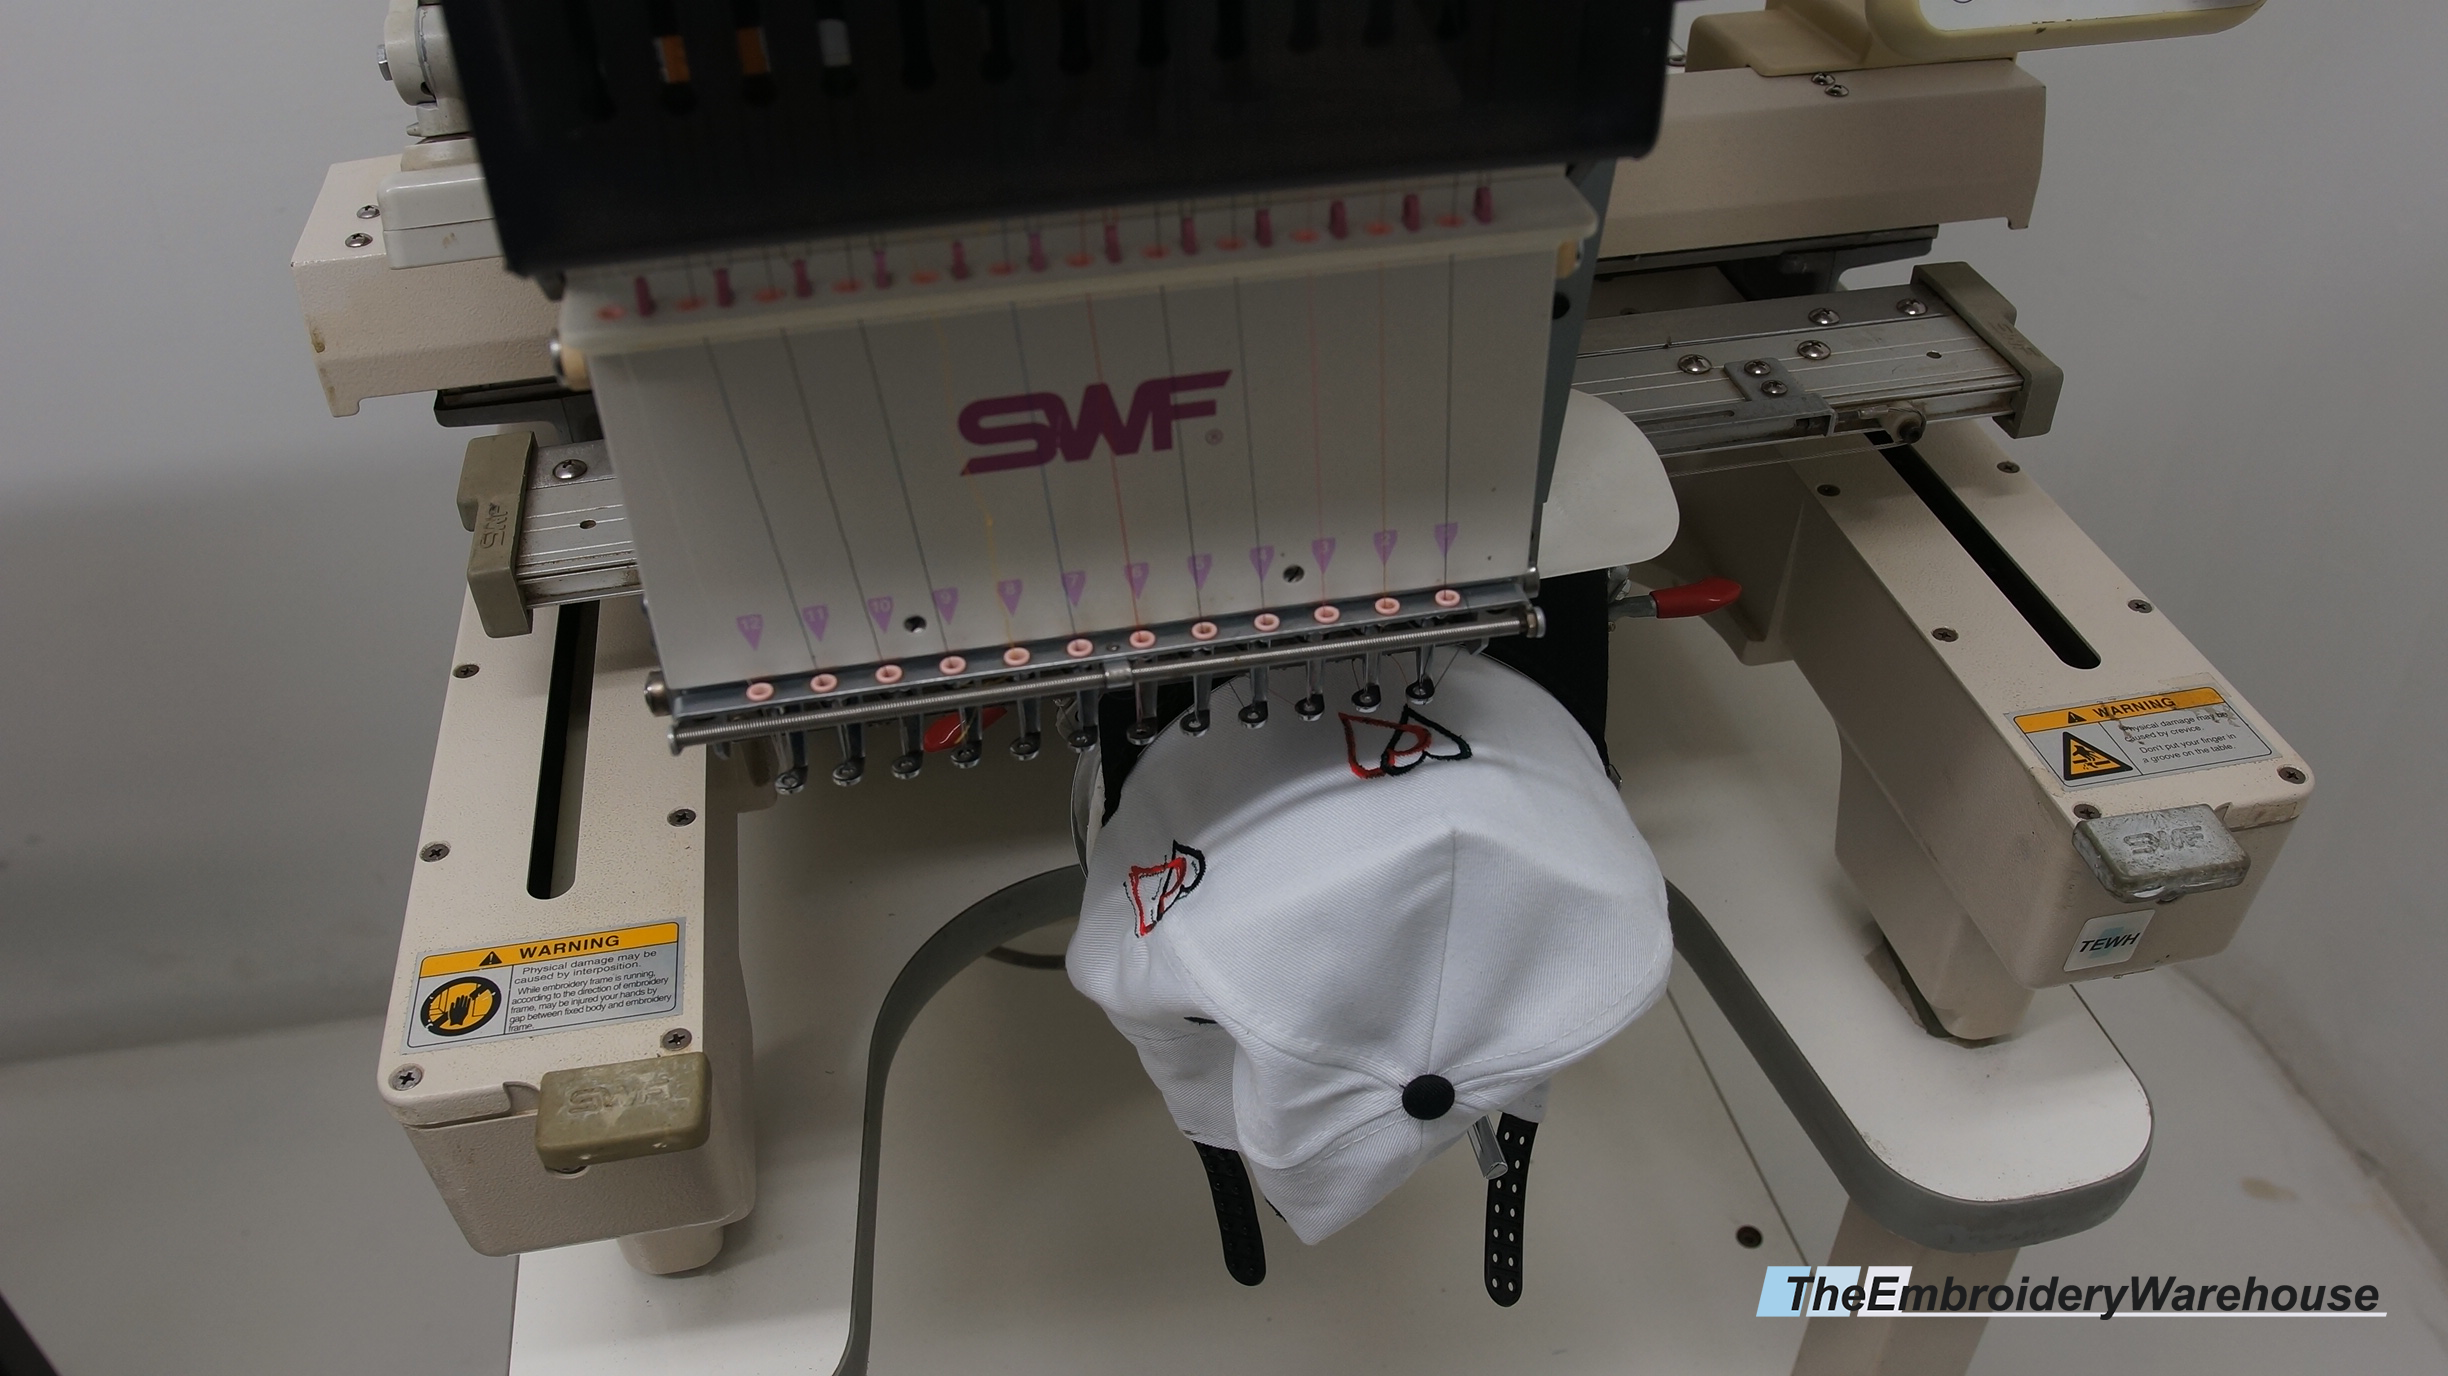 swf embroidery machine prices